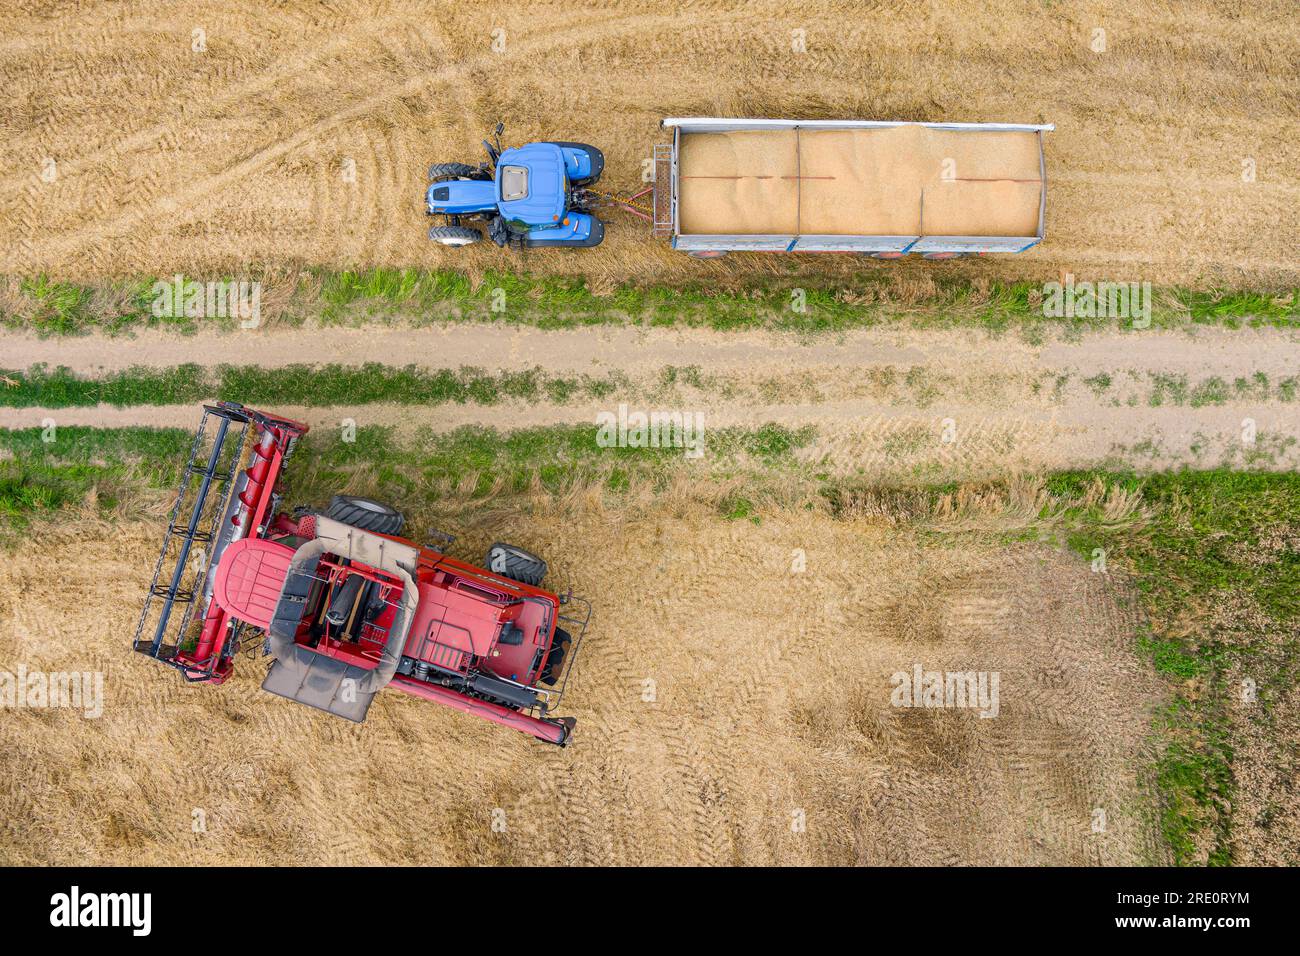 Modern red combine harvesting wheat in the summer. Agriculture aerial view Stock Photo